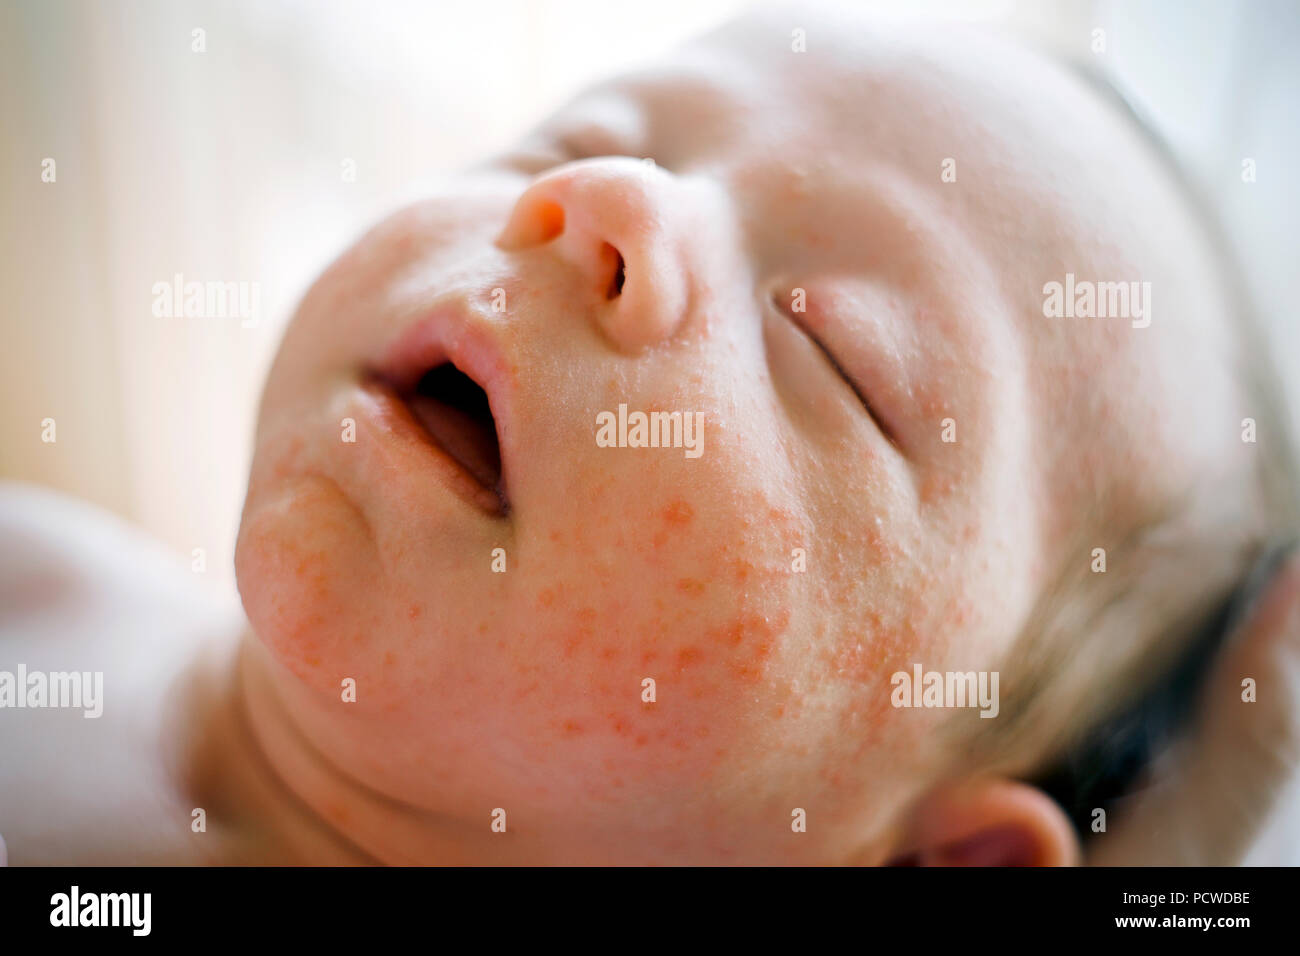 Newborn Baby Boy Face With Many Red Pimples Caused By Atopic Dermatitis